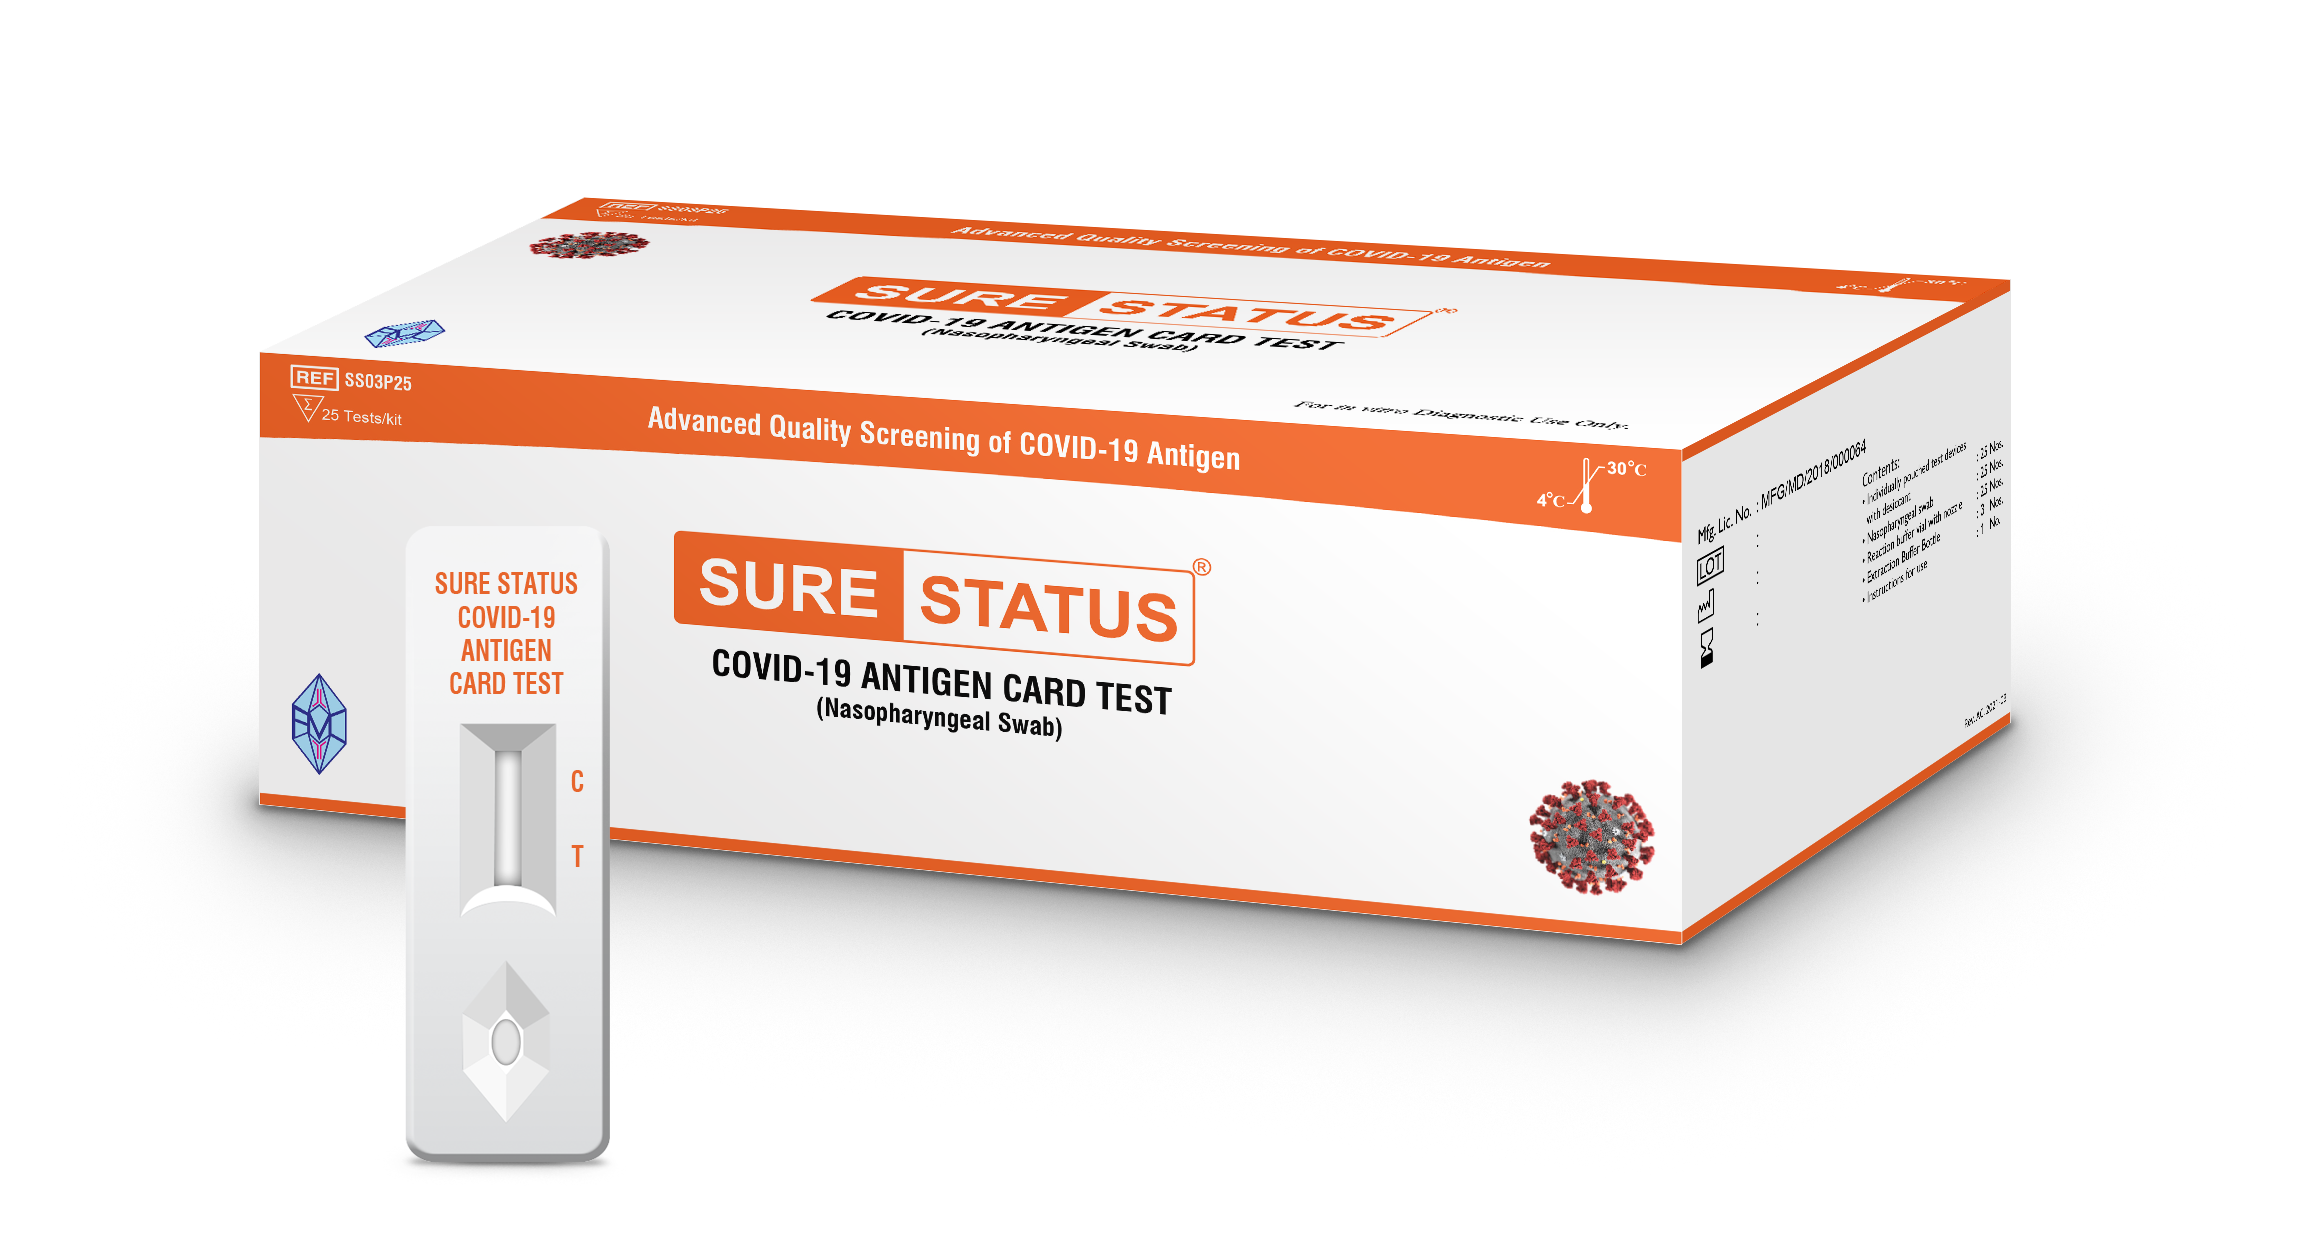 WHO Emergency Use Listing (EUL) Sure Status COVID-19 Antigen Card Test